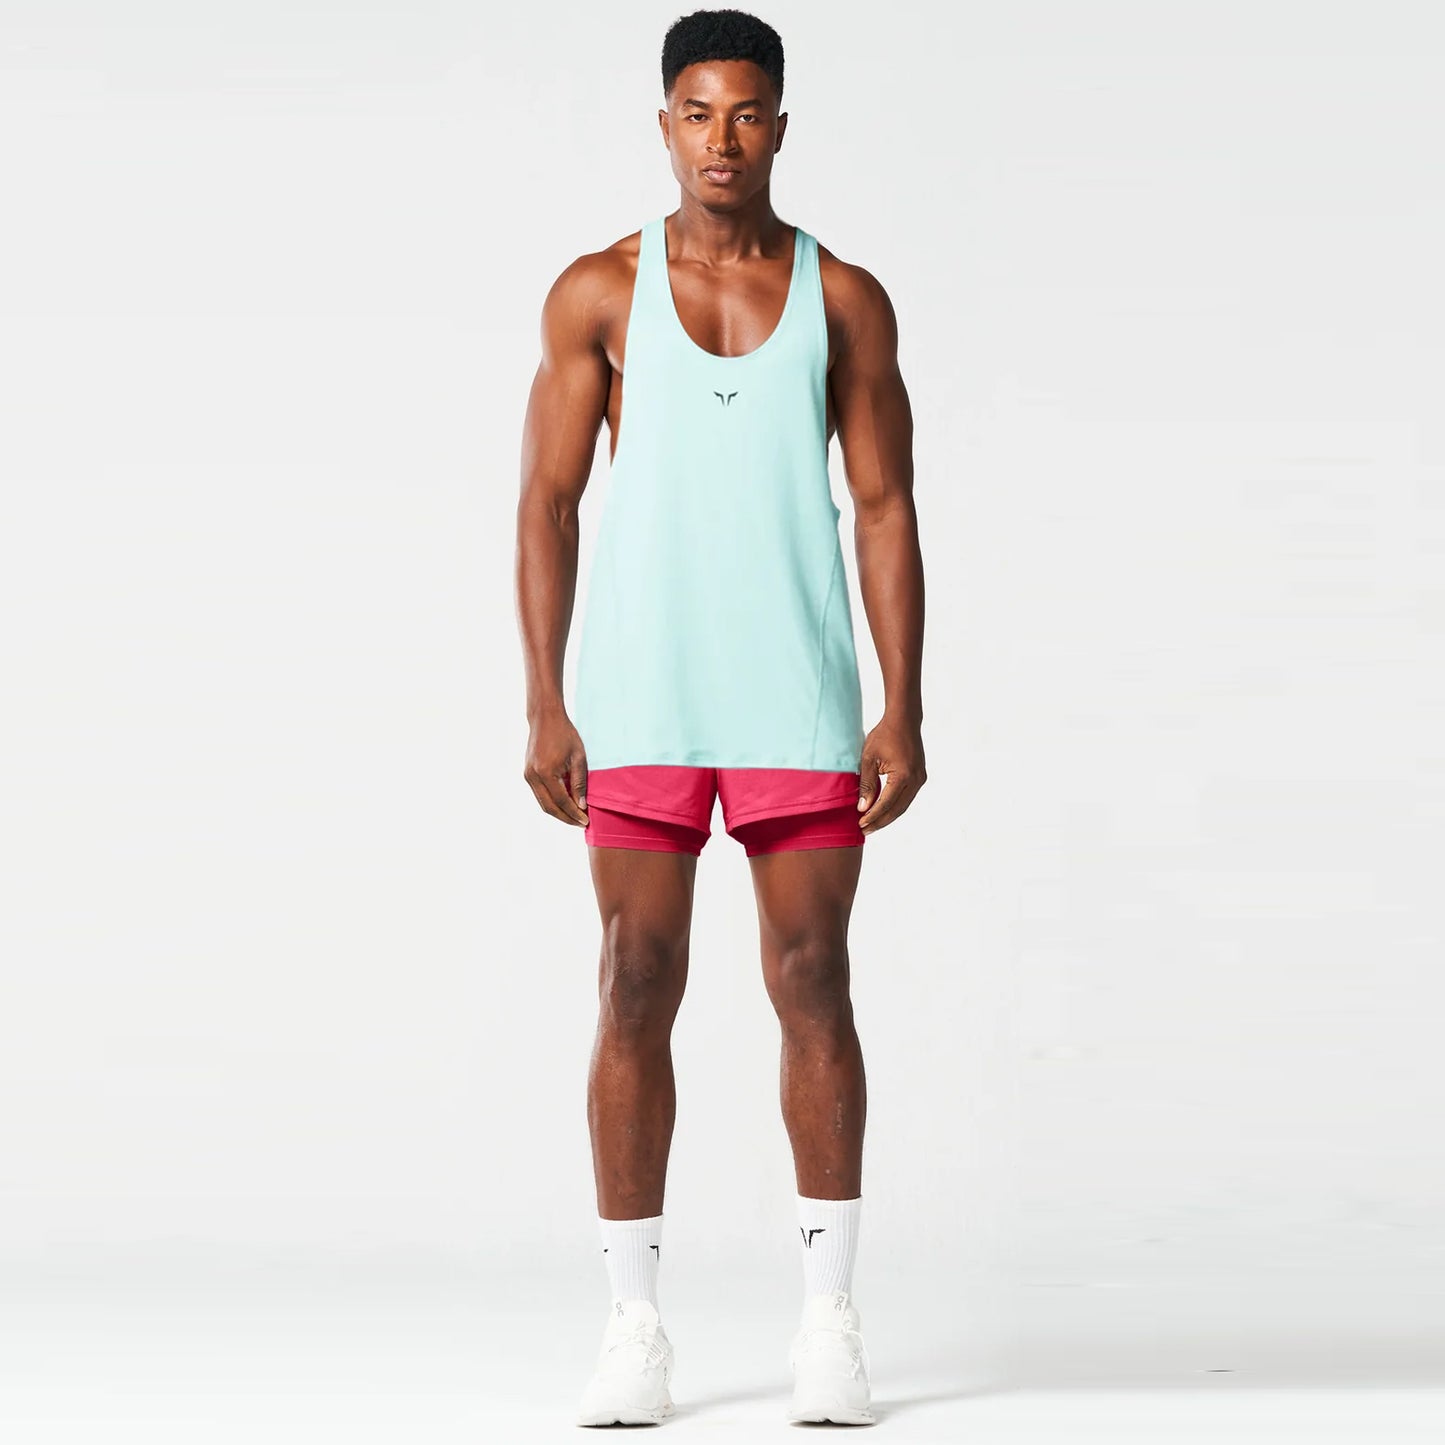 Core Mesh 2-in-1 5" Shorts 2.0 - Teaberry